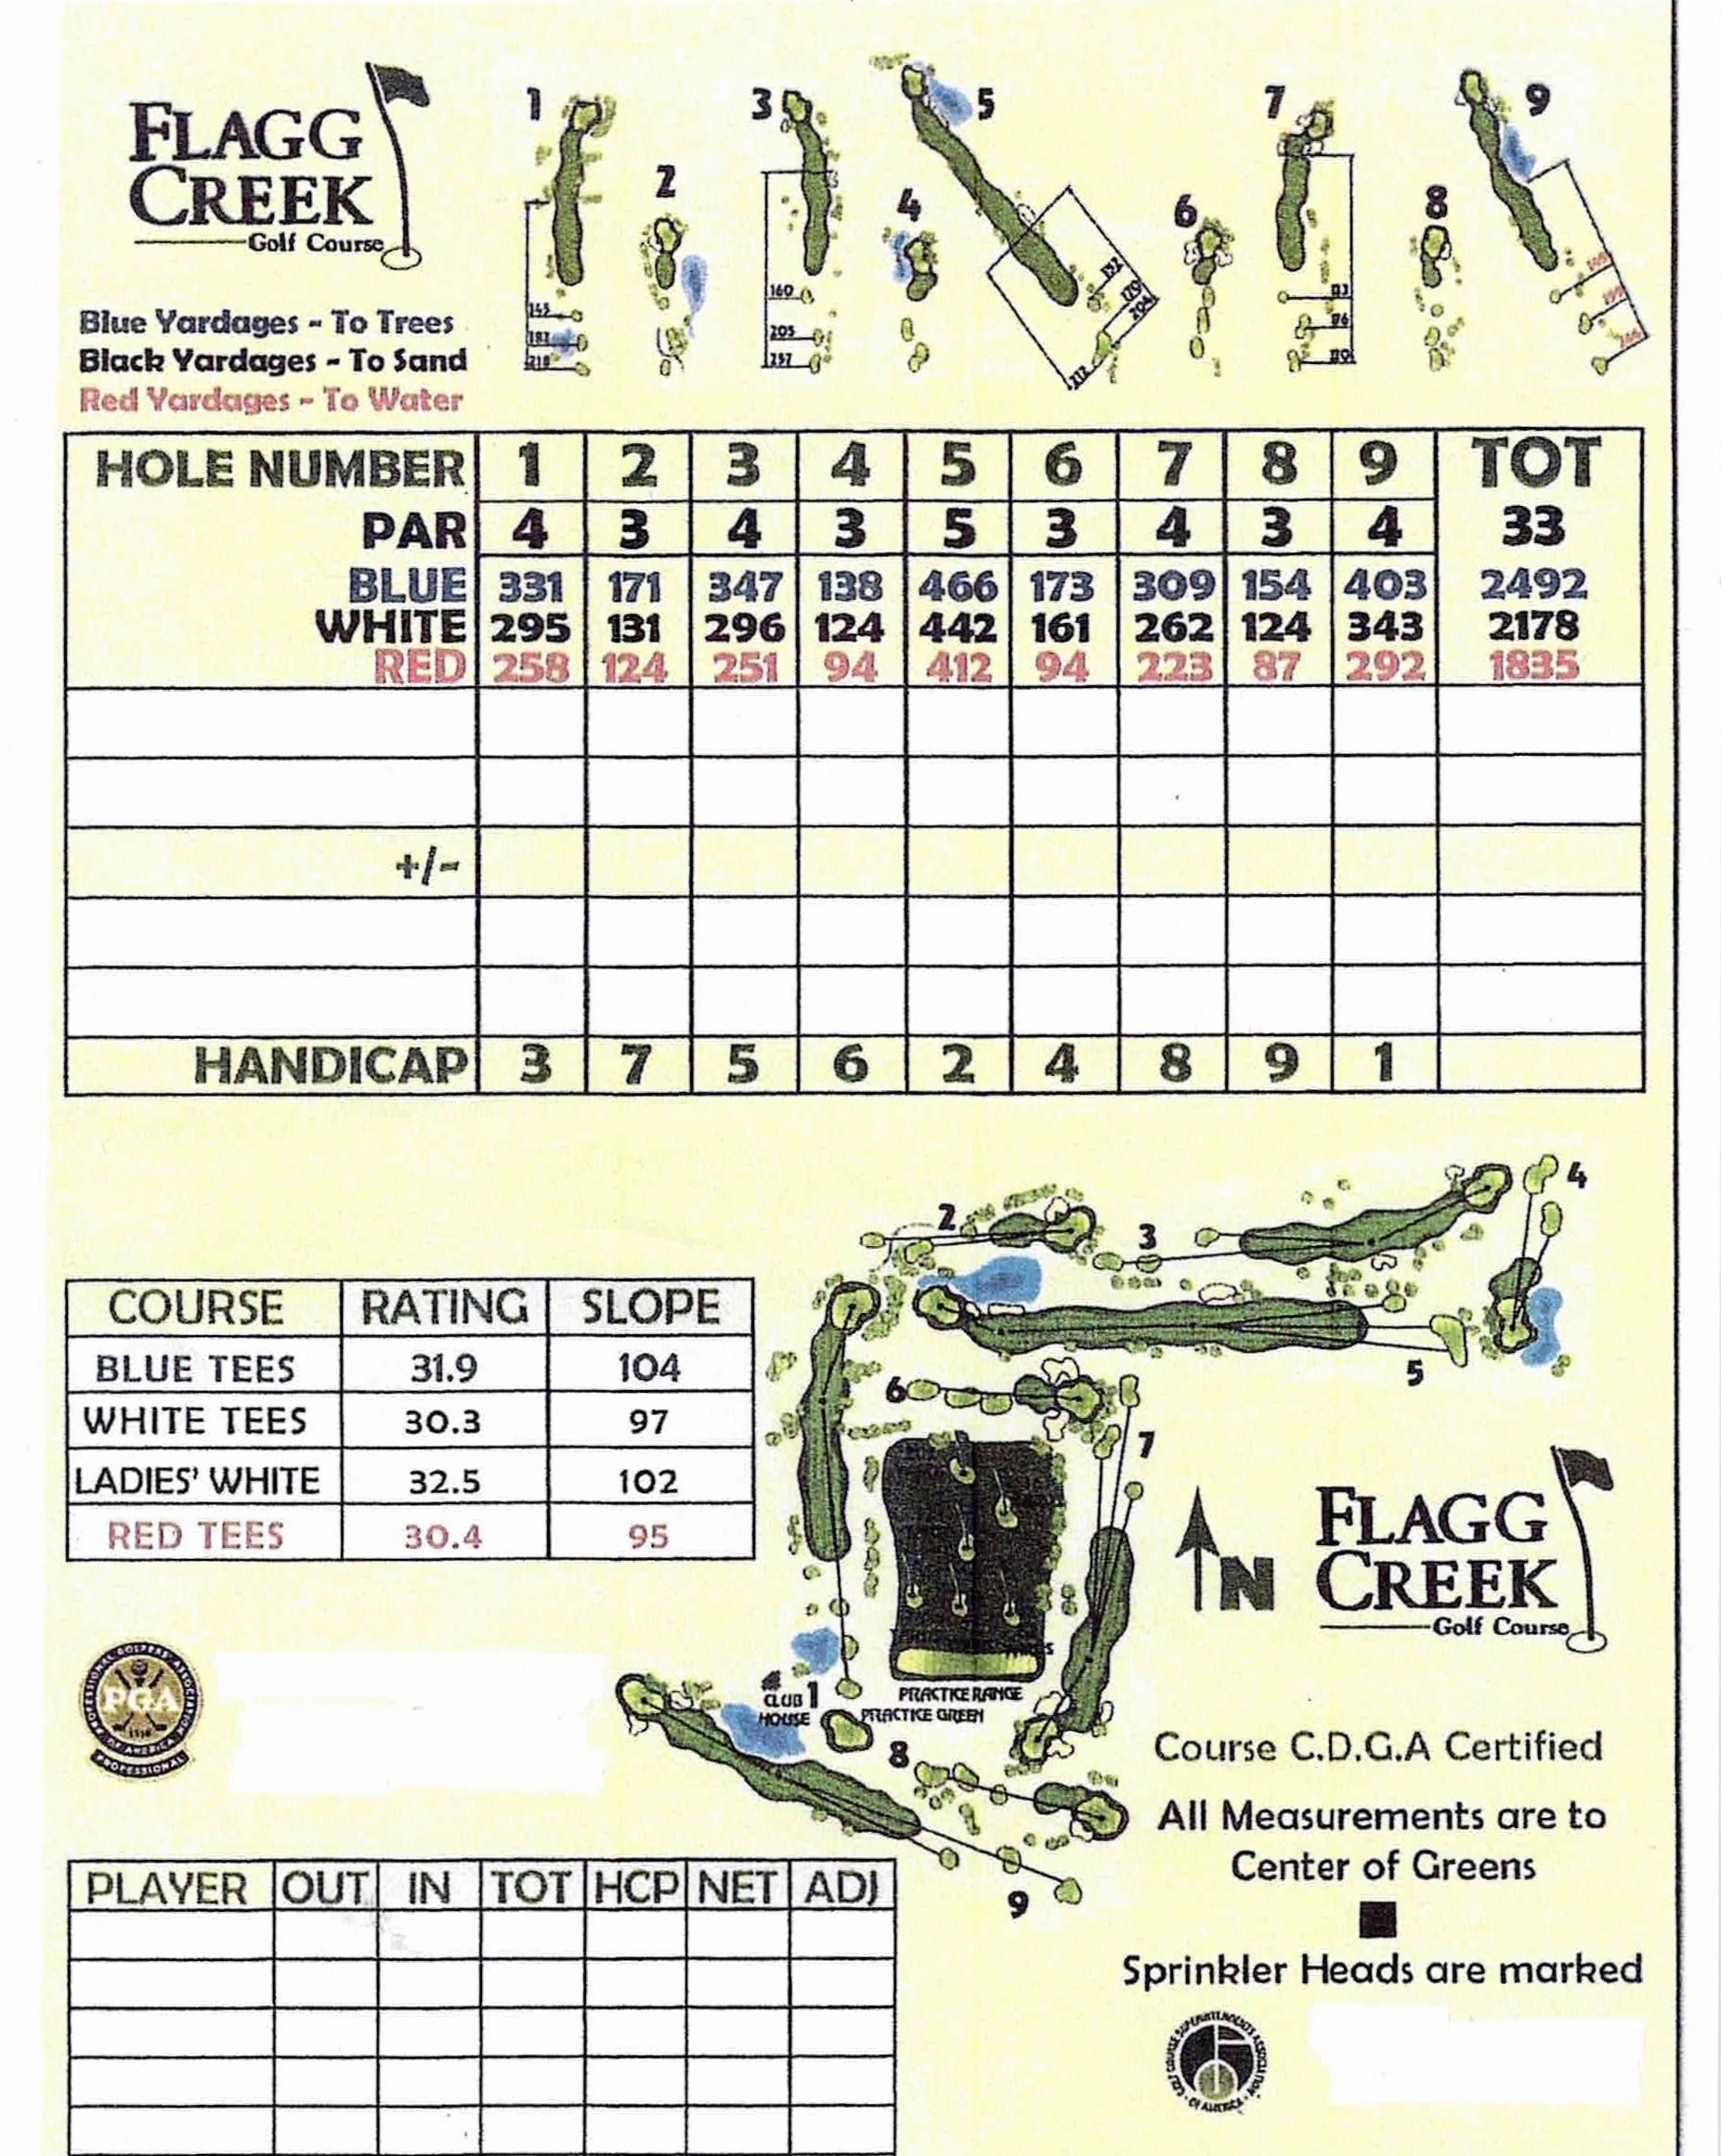 Scan of the scorecard from Flagg Creek Golf Course in Countryside, Illinois. 